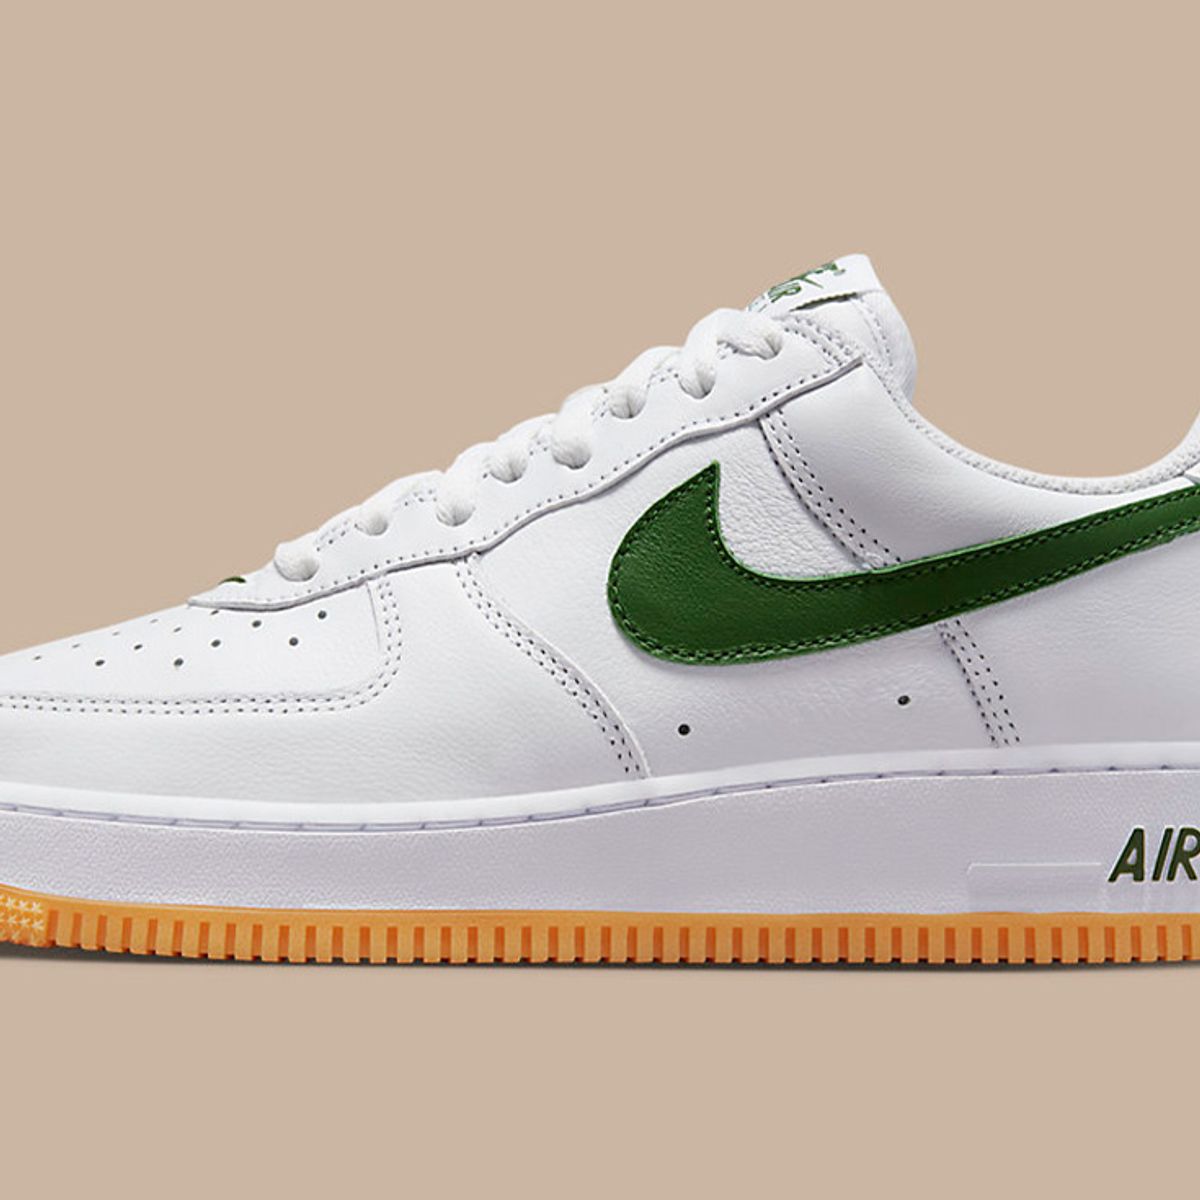 Green and Gum Accent the Nike Air Force 1 Low 'Colour of the Month